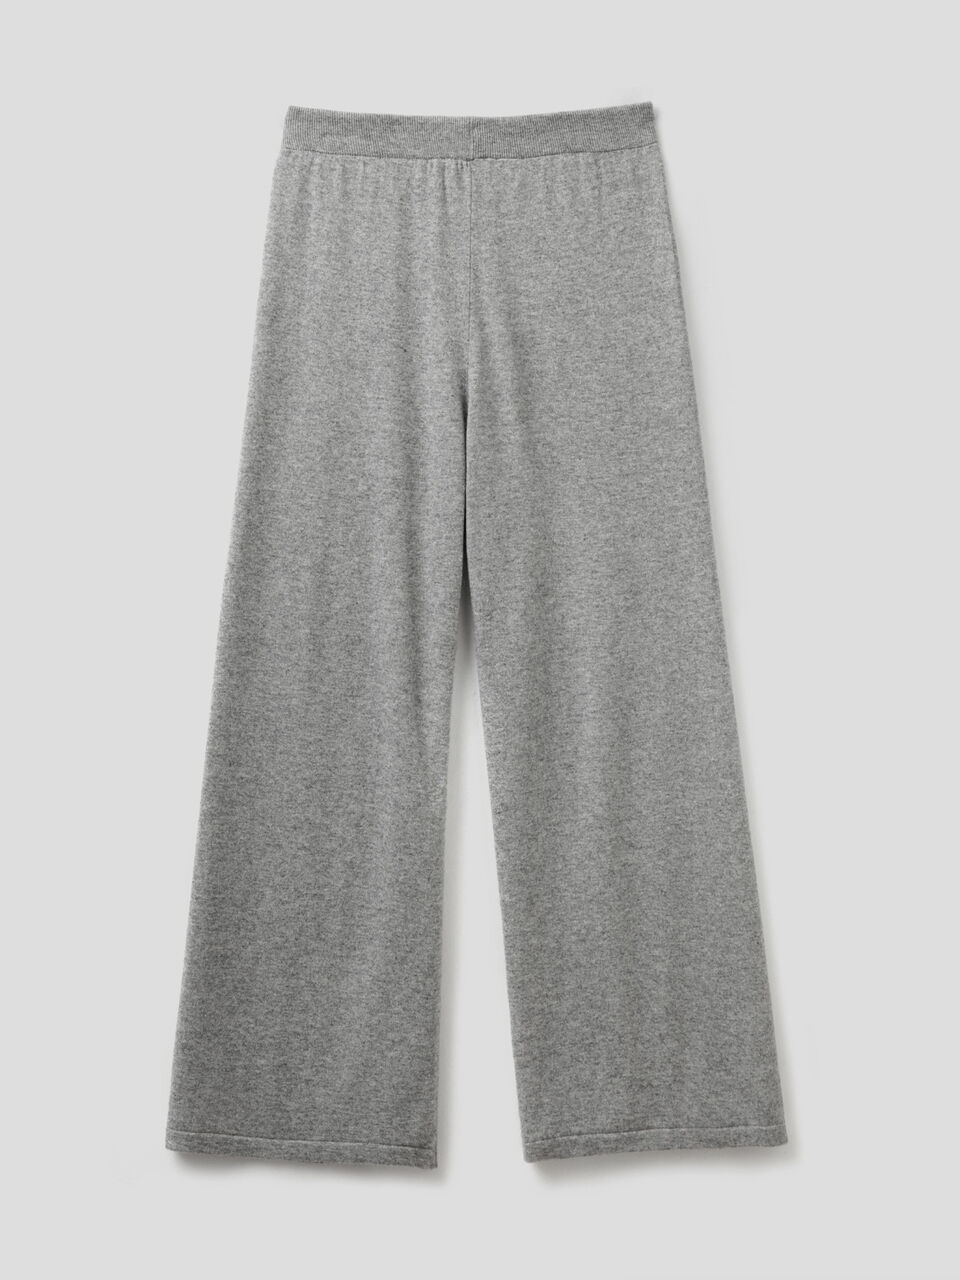 Baby Track Pants Deep Gray and Gray Dior Oblique Wool and Cashmere-Blend  Knit Jacquard